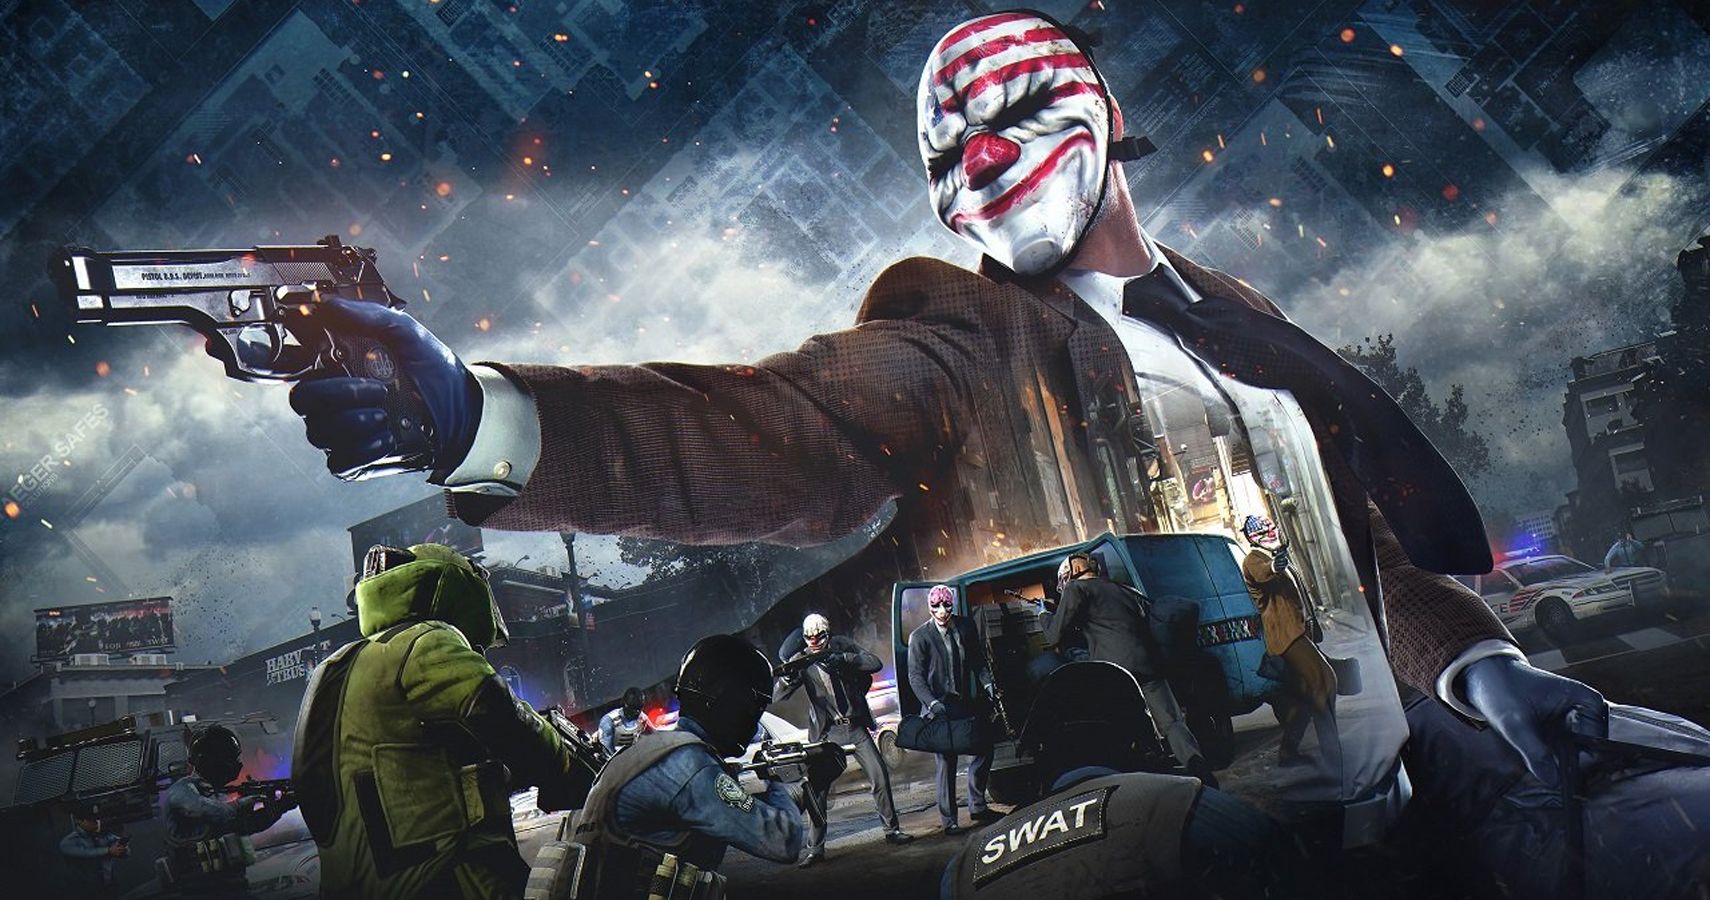 Developer Of Payday 3 Is Still Looking For A New Publisher